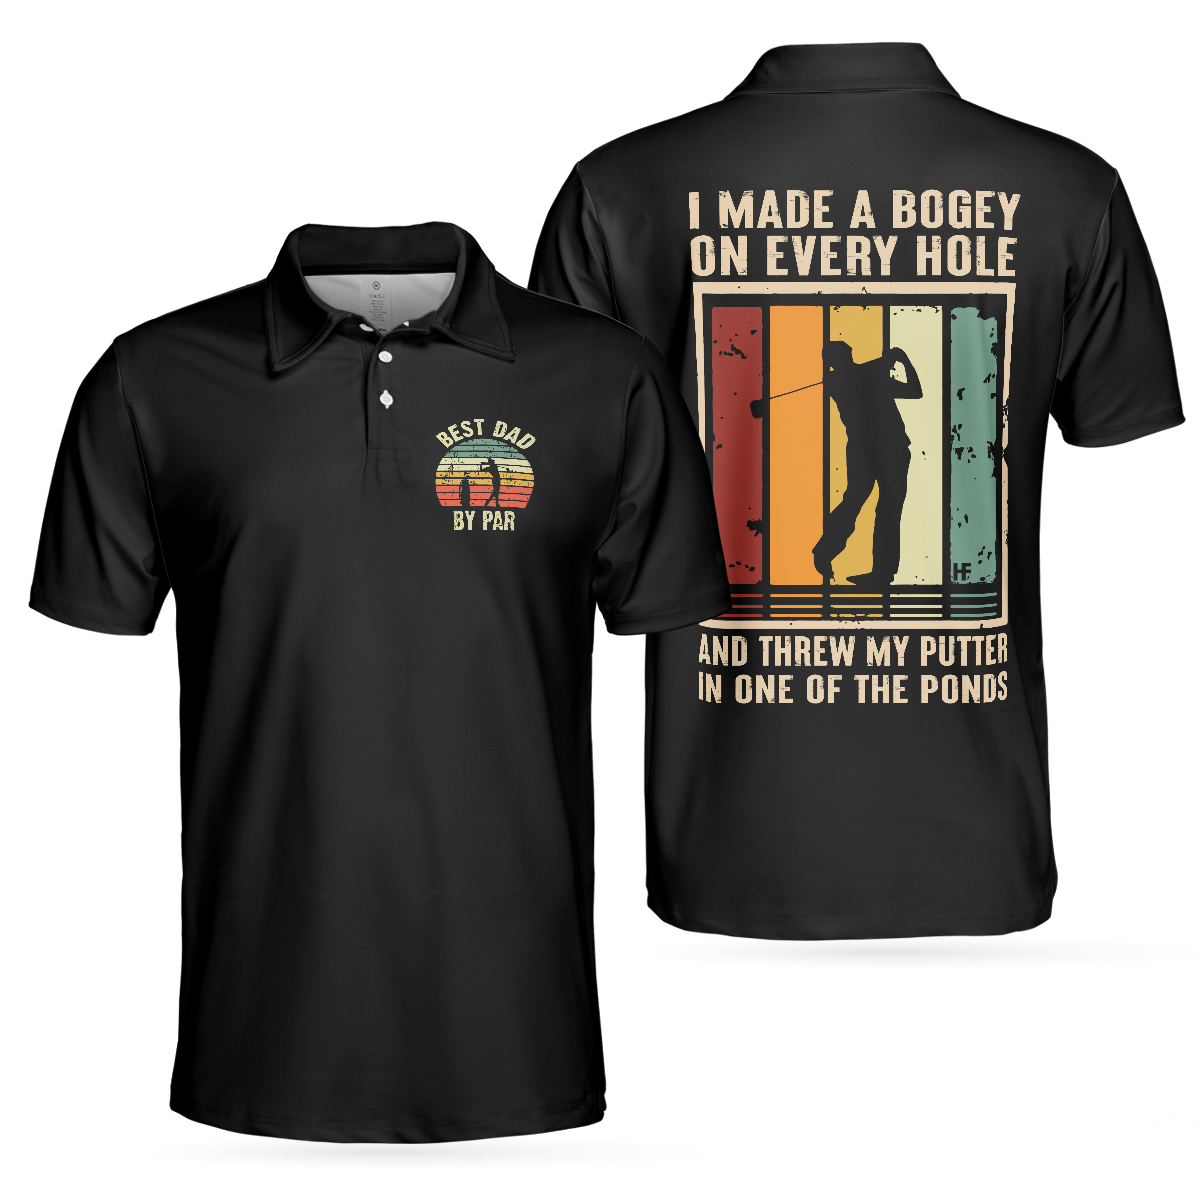 Golf Best Dad By Par Polo Shirt Black Golf Shirt With Sayings Best Golf Gift Idea For Dad - 1